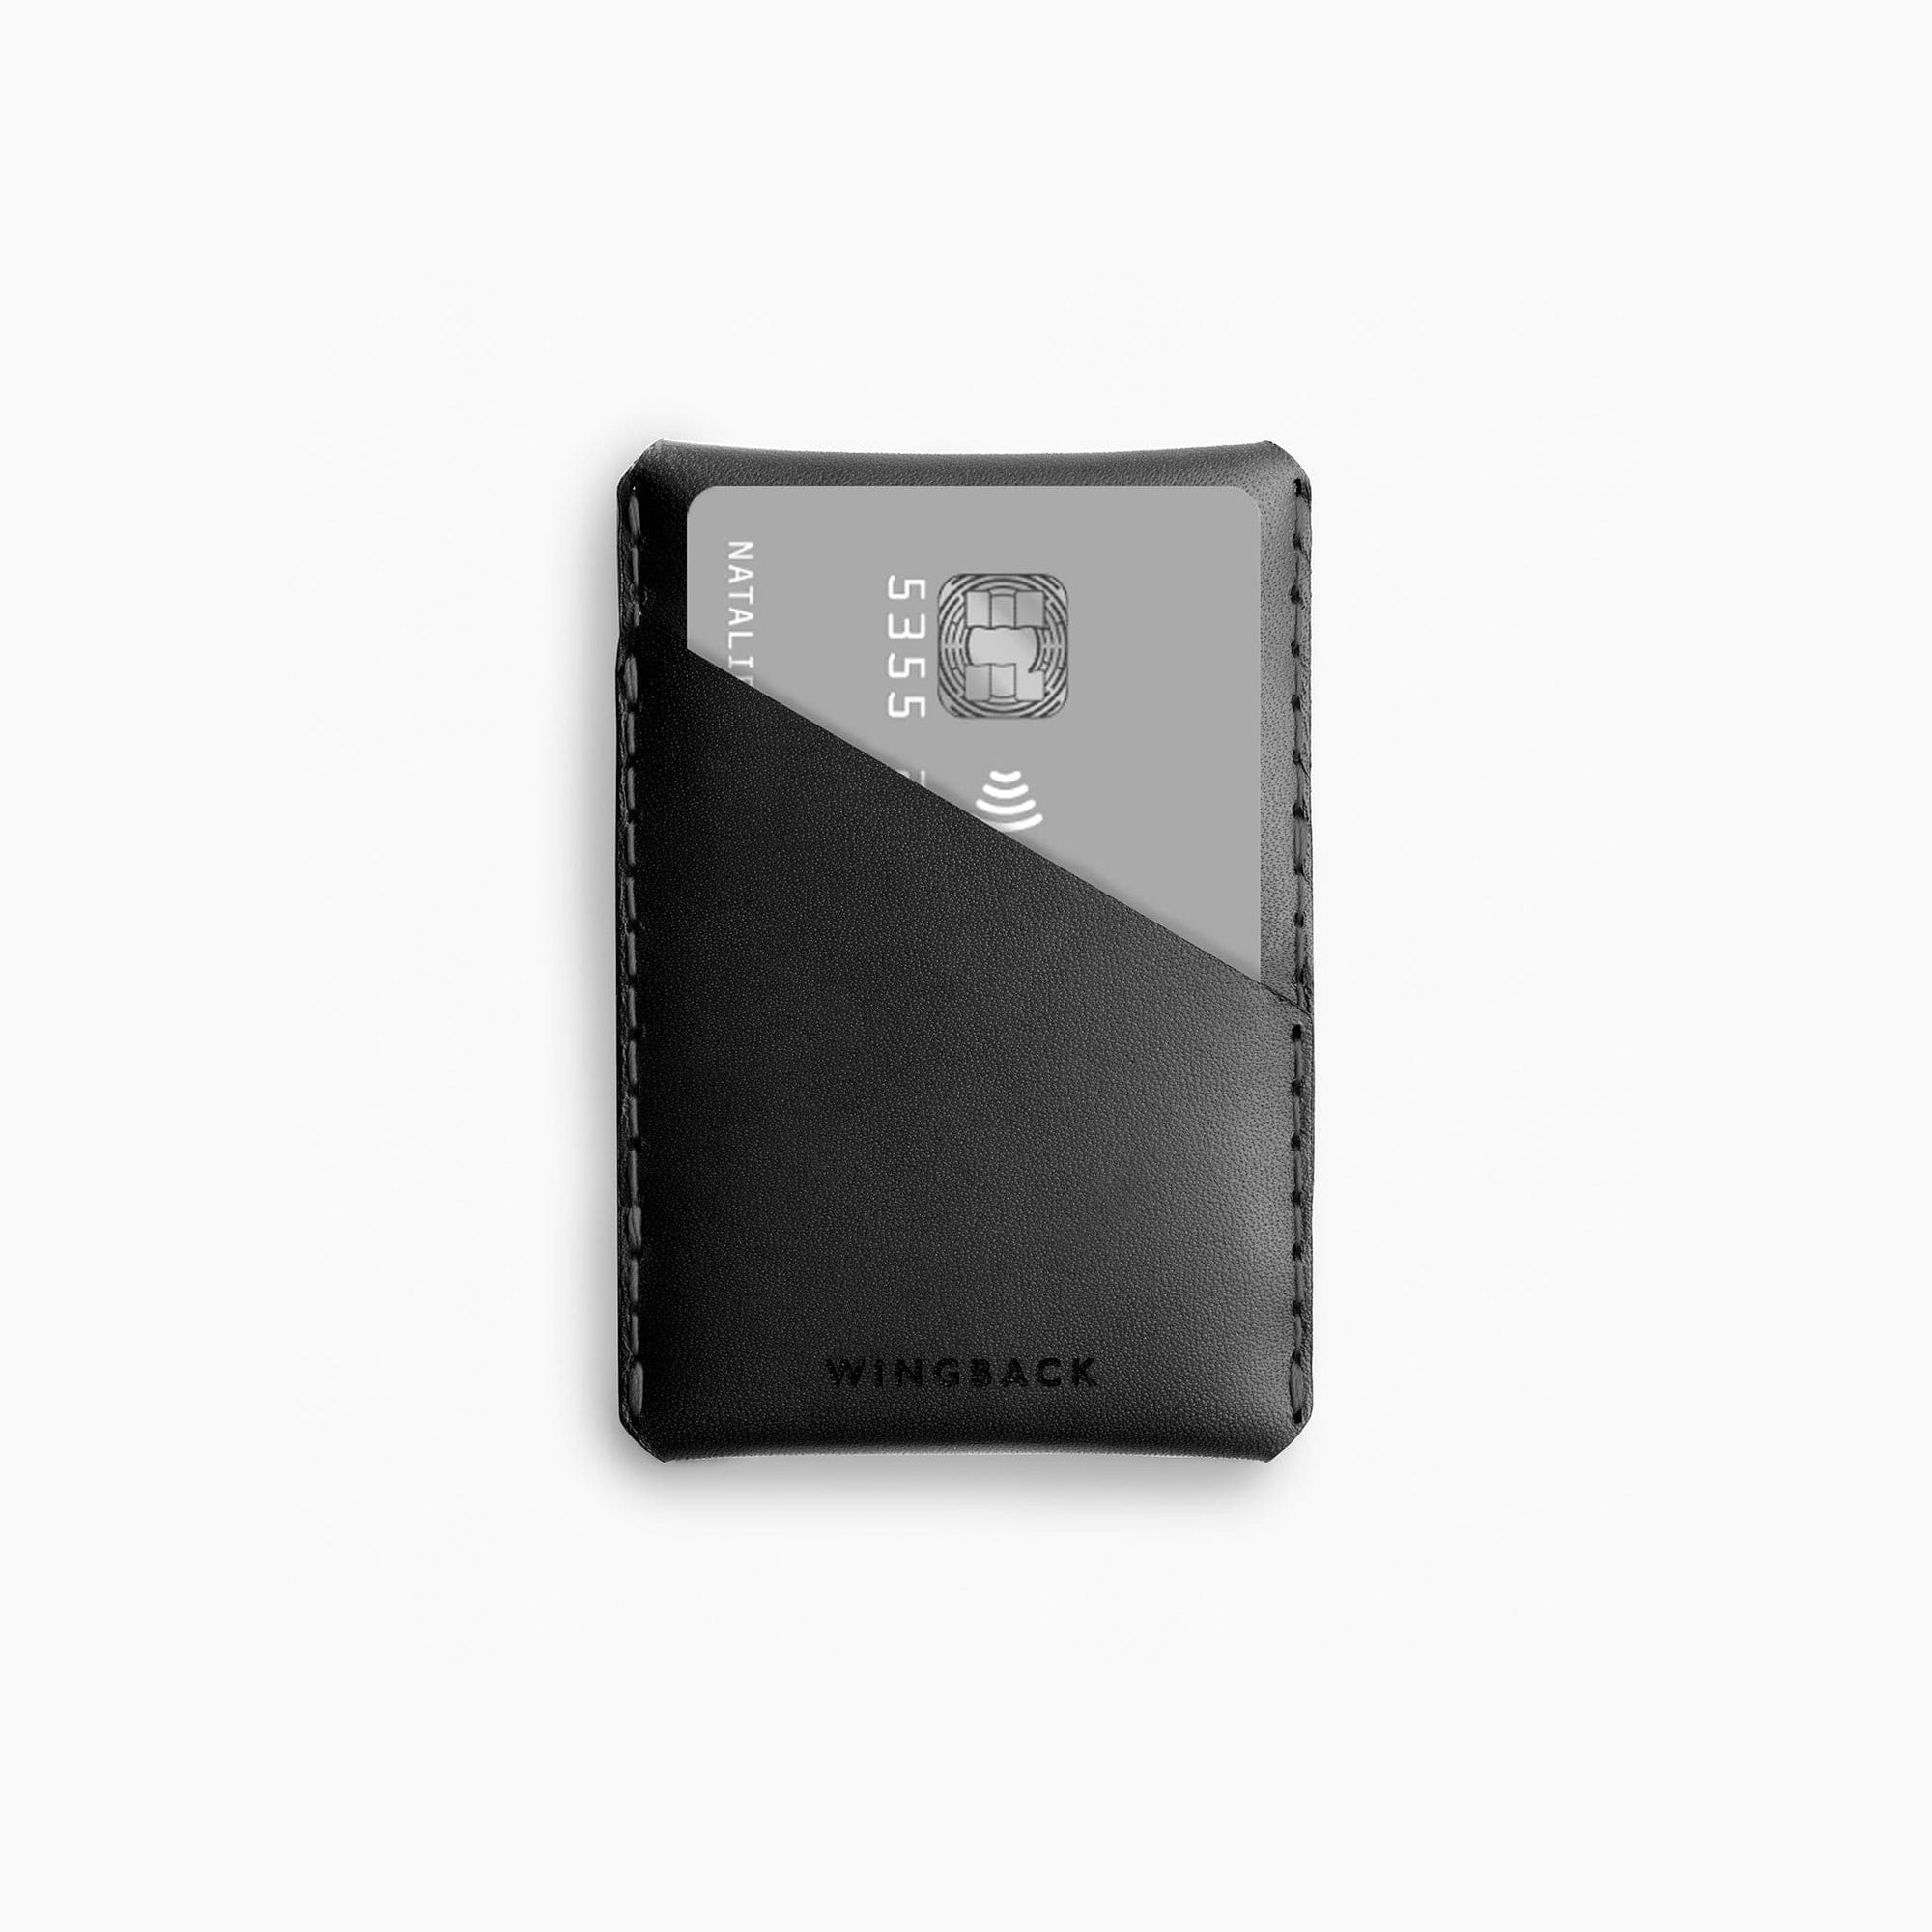 Wingback Wingston CardHolder - Dual Symmetrical Pockets - Storming Gravity